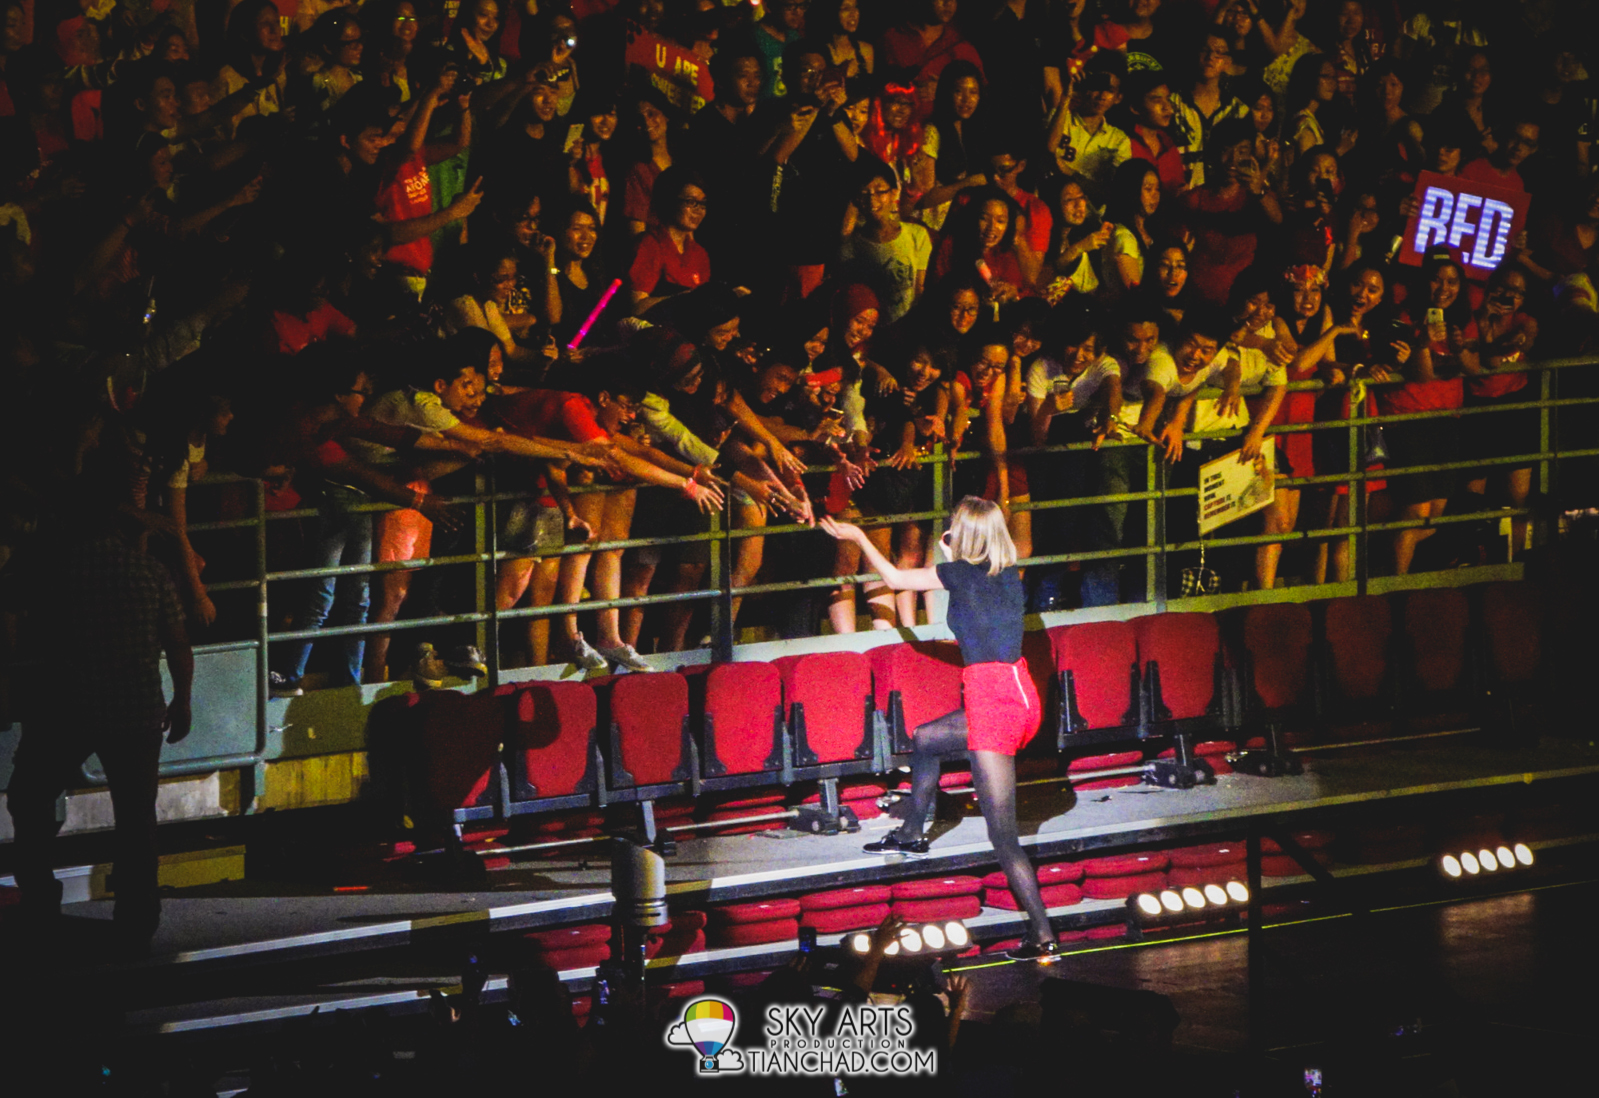 Taylor swift hoding fans' hand at red tour at putra indoor stadium, malaysia